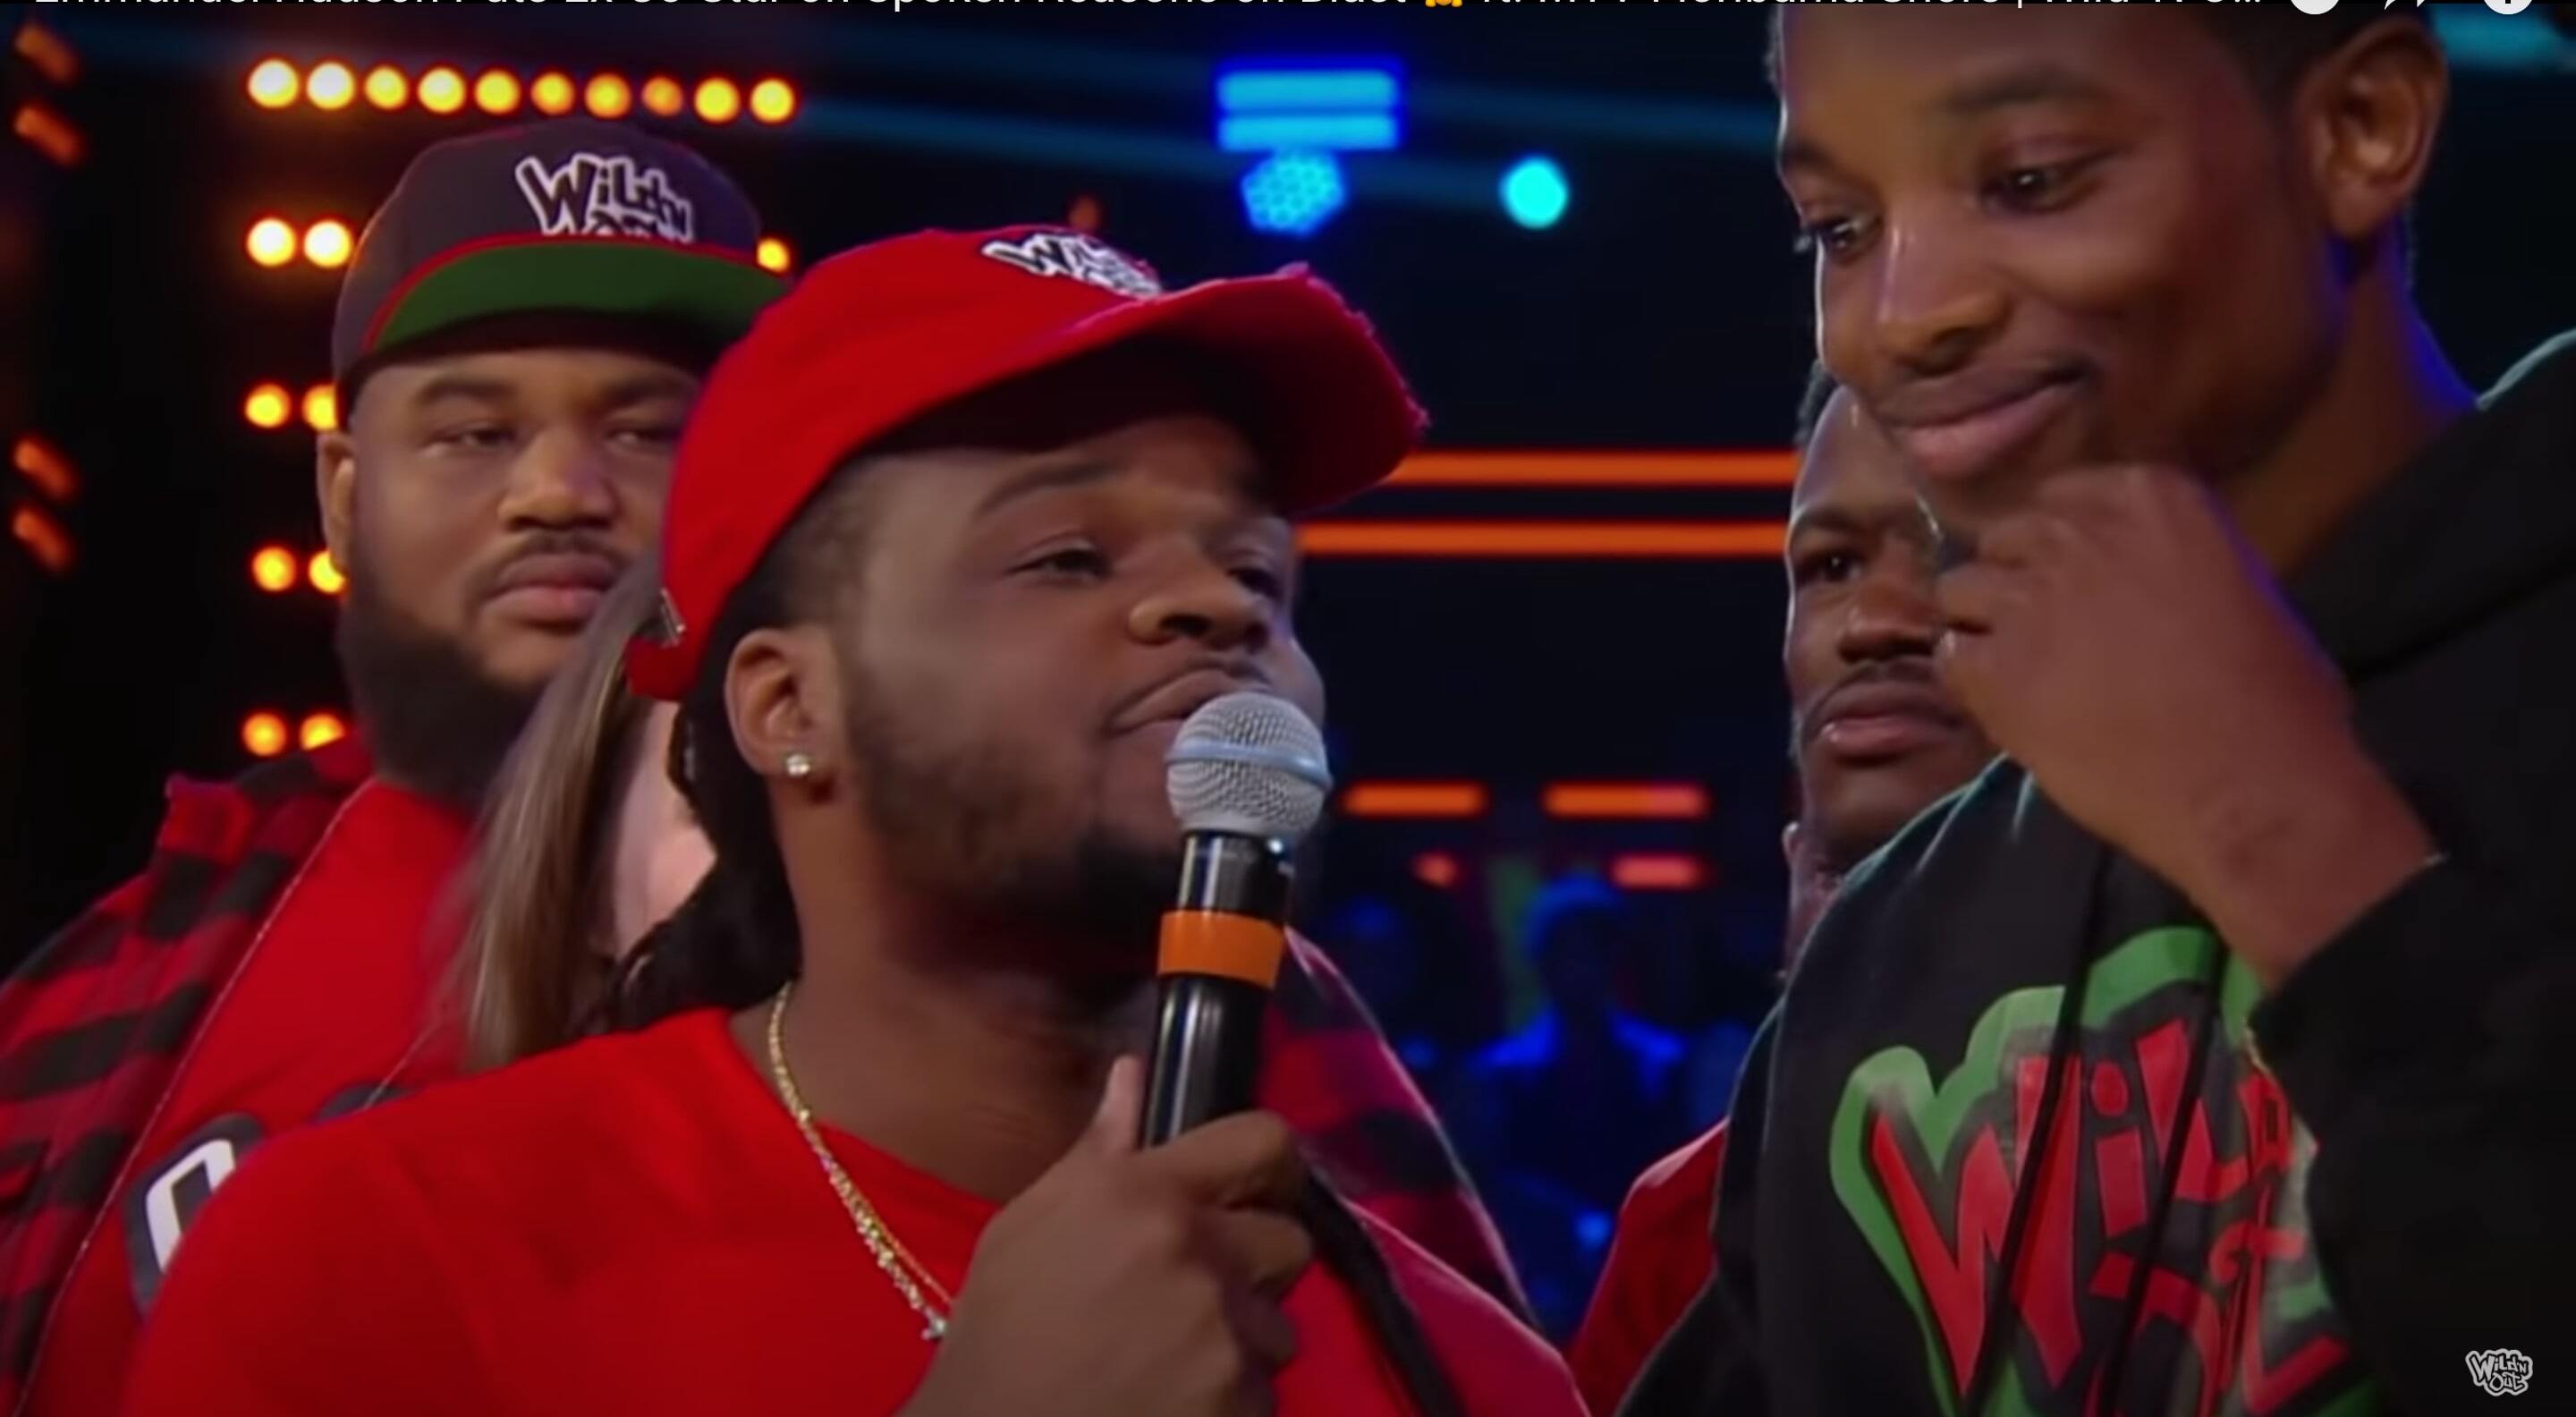 Emmanuel Hudson Airs Out His ‘Why You Asking All Them Questions’ Co-Creator On 'Wild N’ Out' Episode